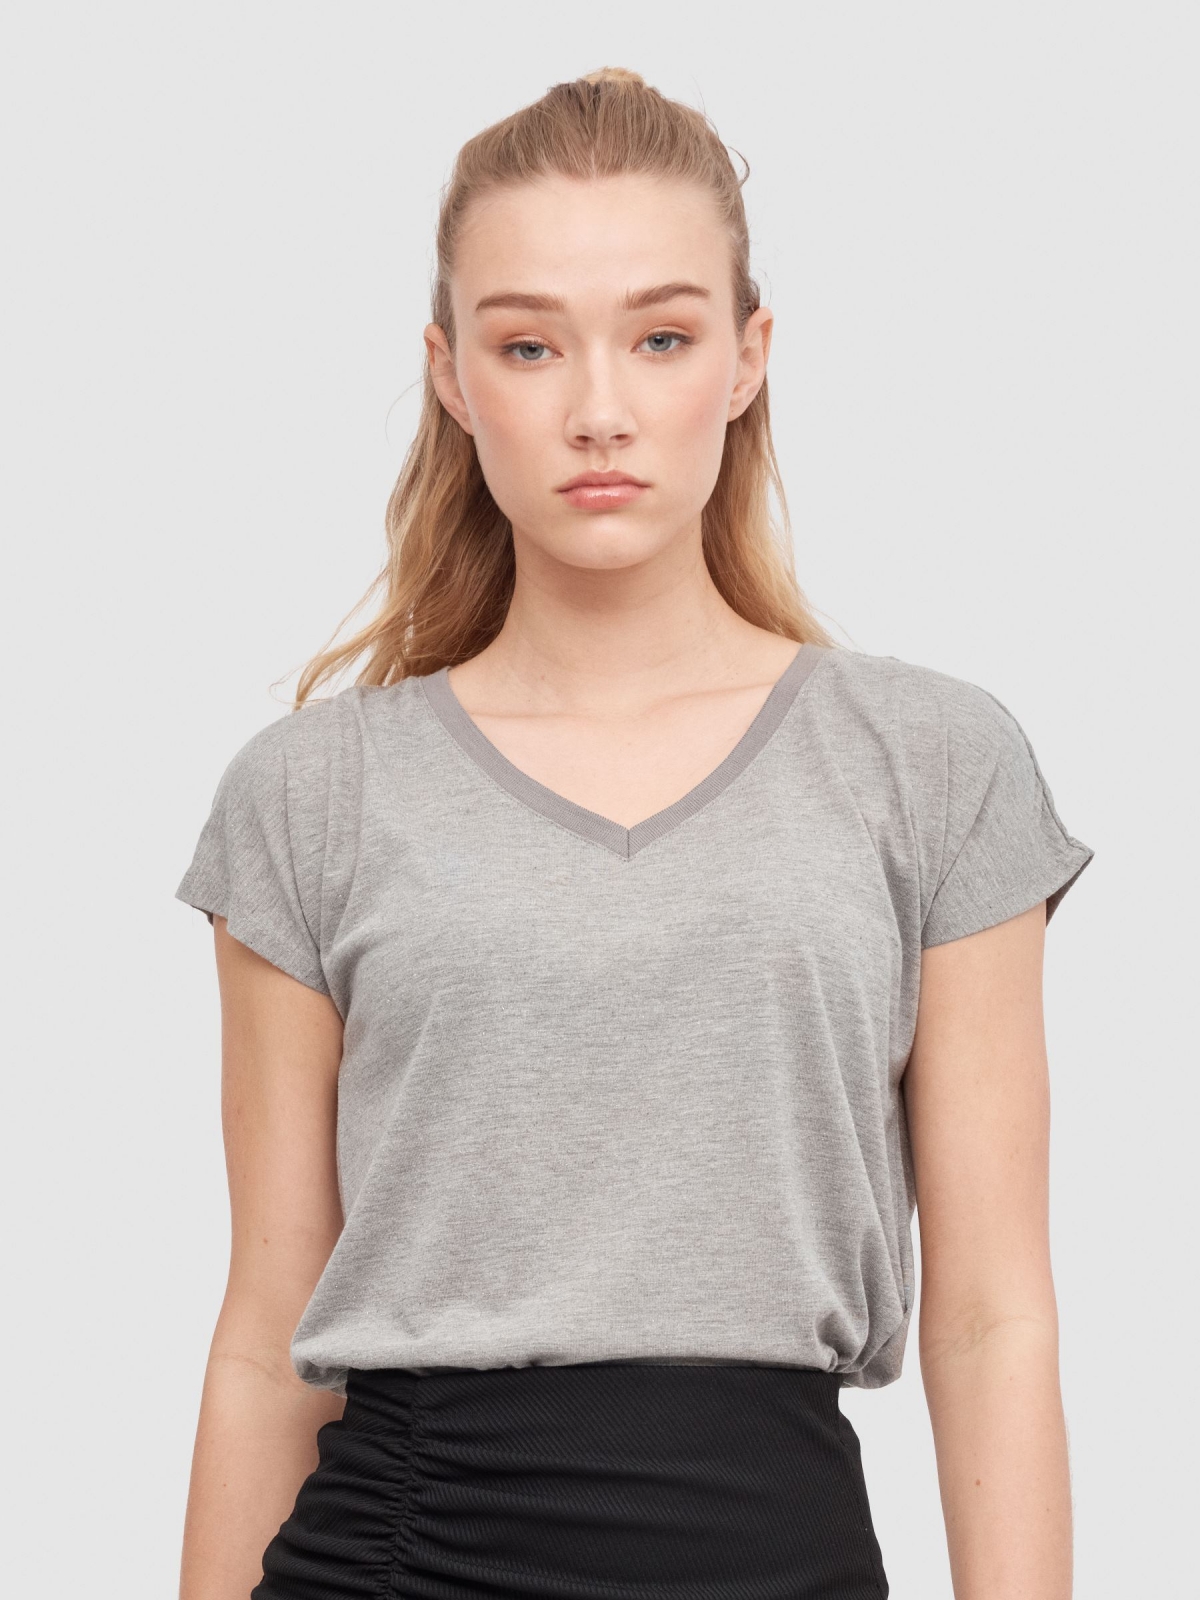 Sleeveless V-neck T-shirt grey middle front view